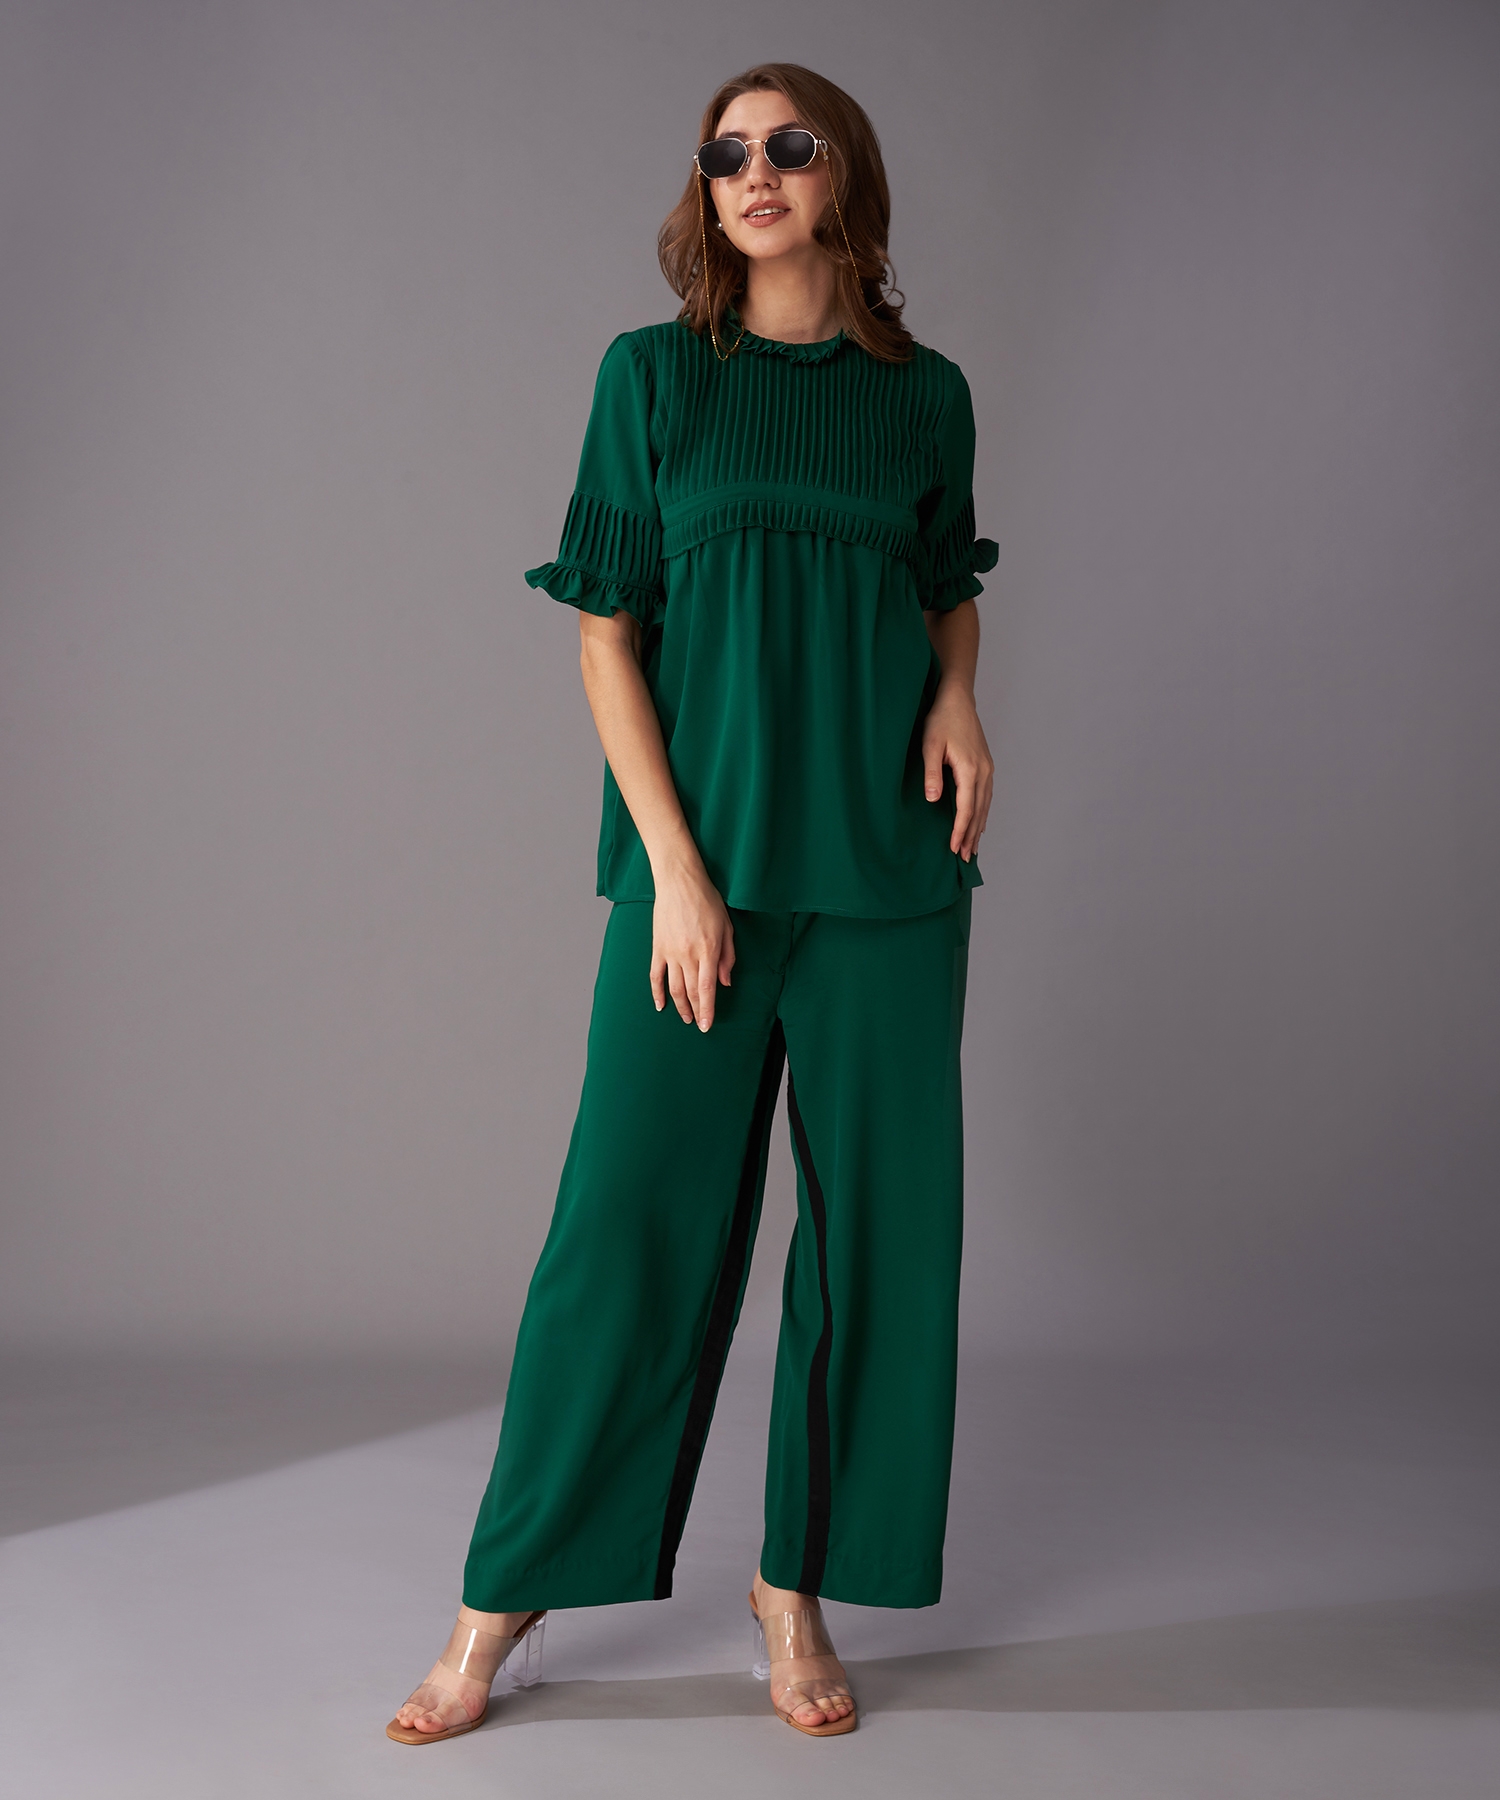 Emerald Pin-Tuck Solid Co-ord Set (Green)